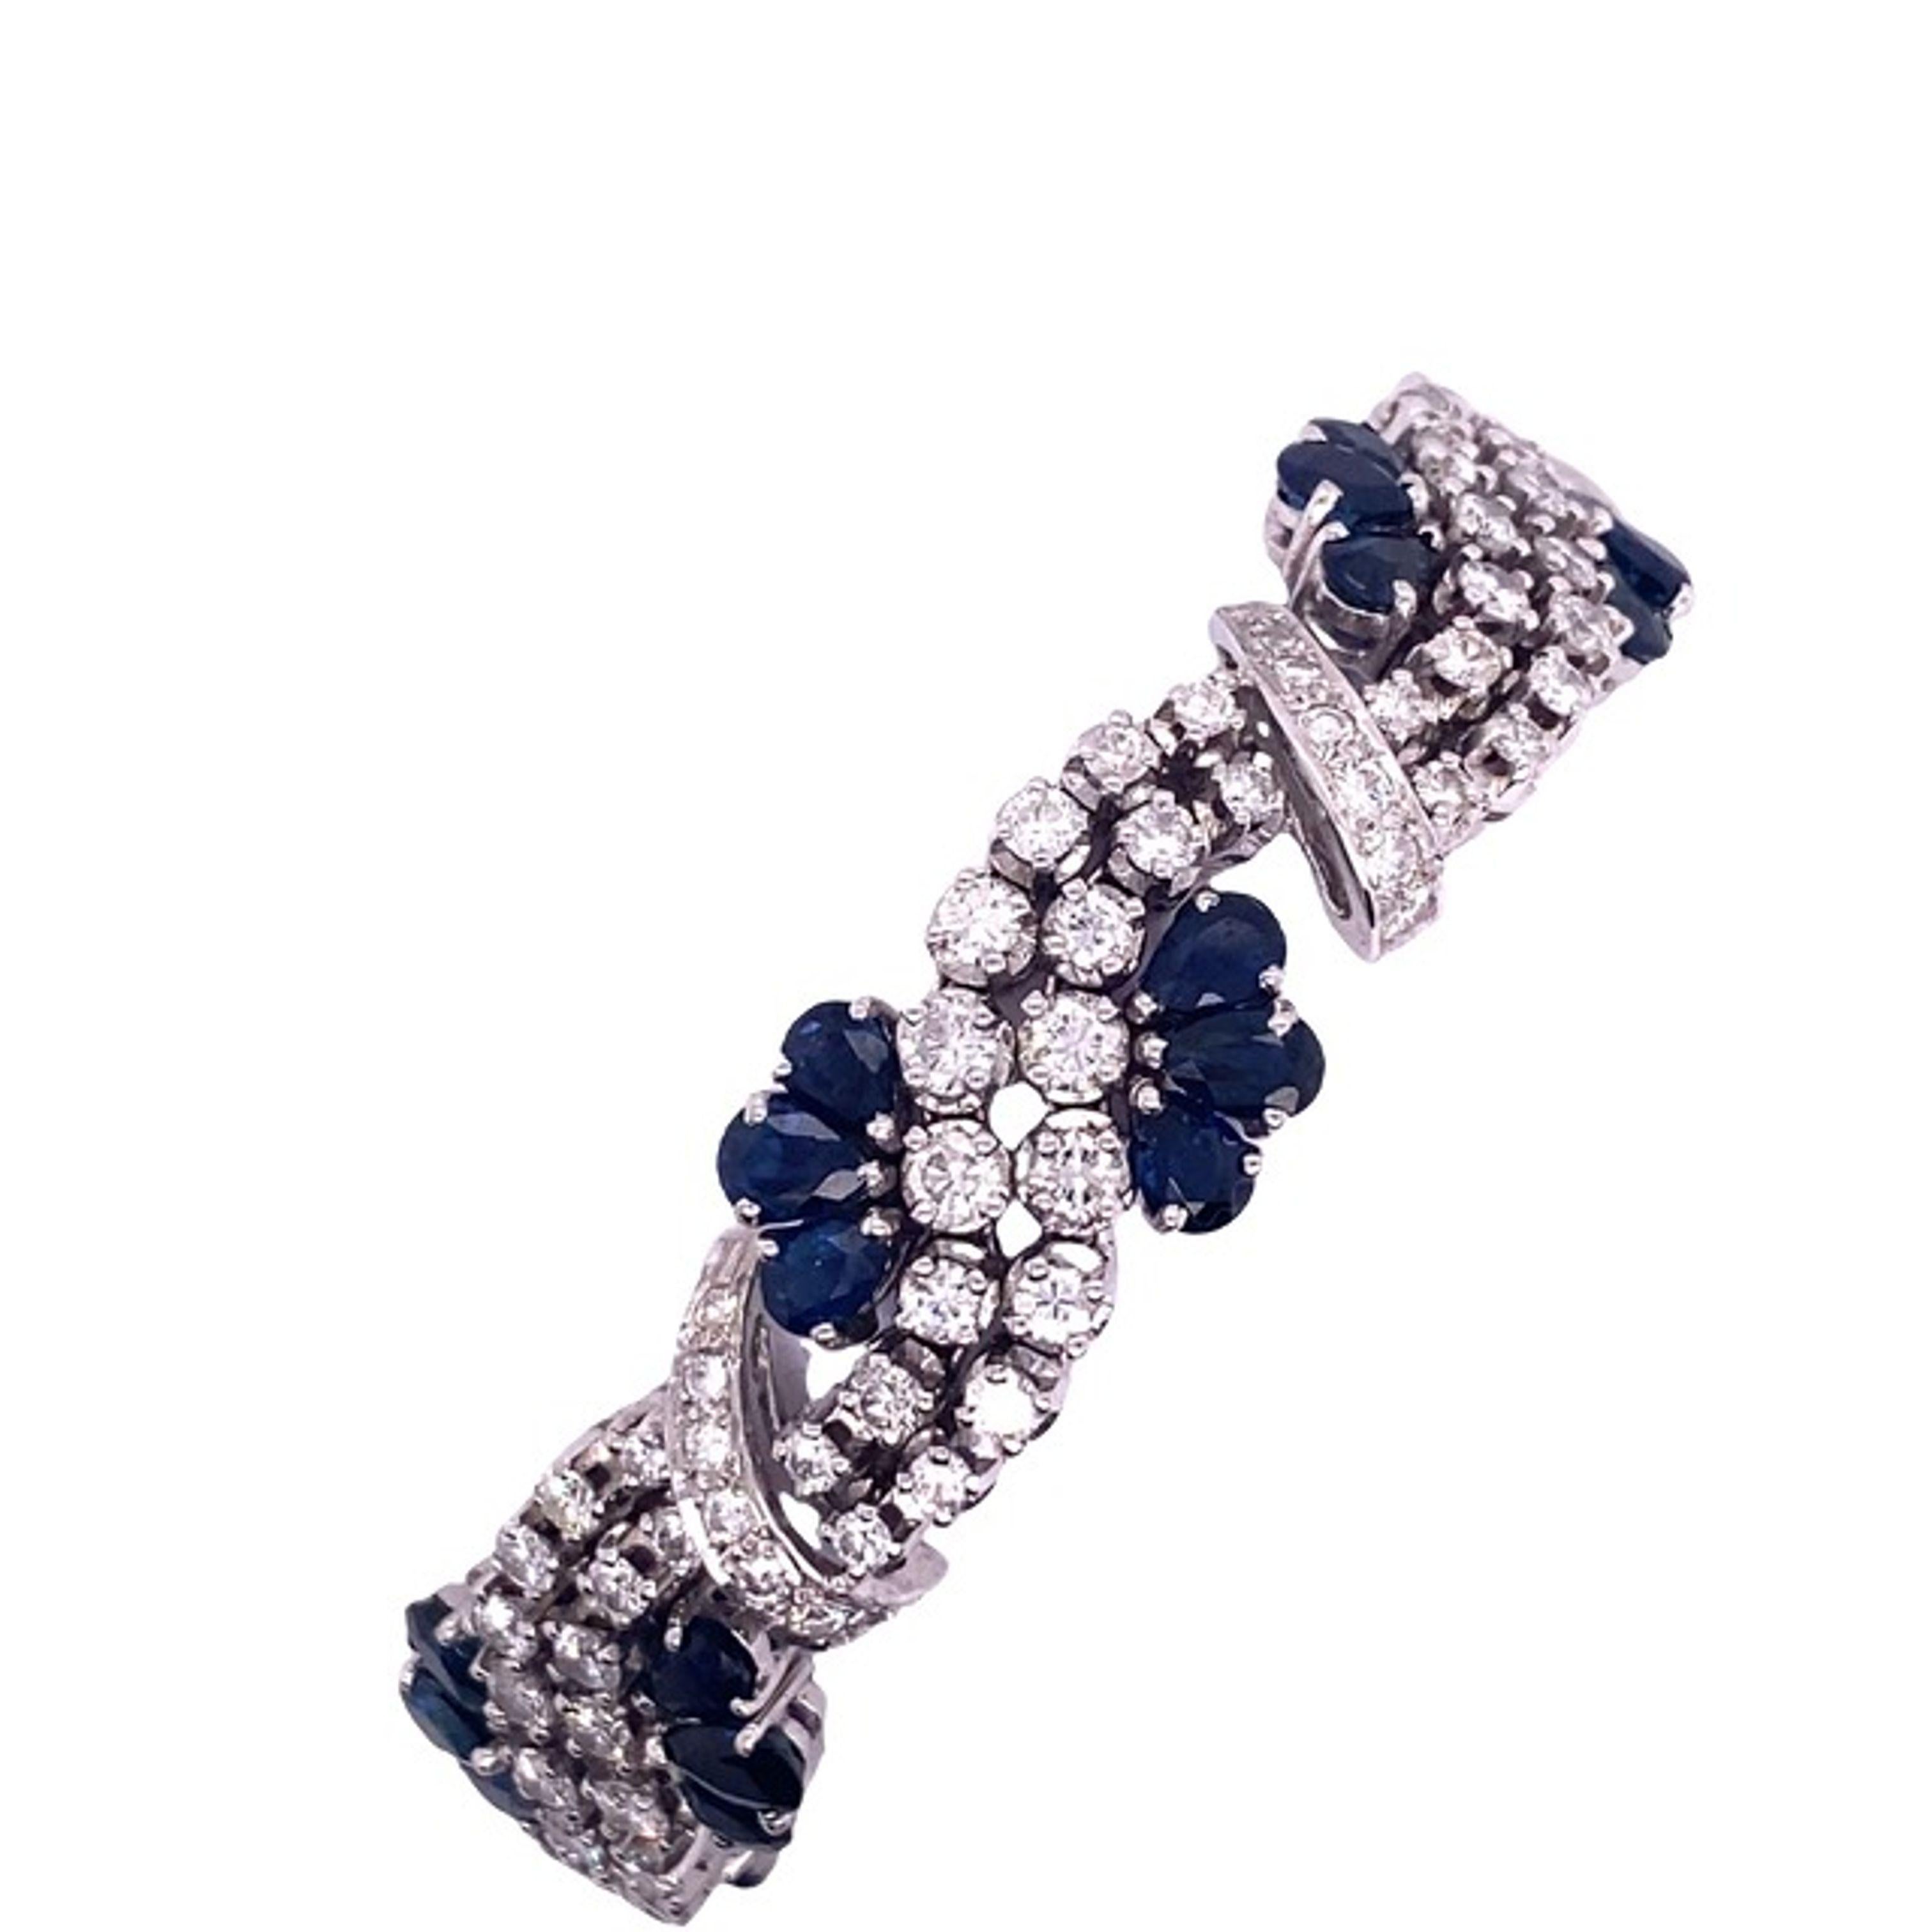 This luxurious and extravagant bracelet features 6.50ct of round diamonds and 6.0ct of fine-quality sapphire. The beautiful 6.5ct round diamonds are set in 2 rows in the center. This bracelet is made of 15t white gold (69.56% gold) and locks